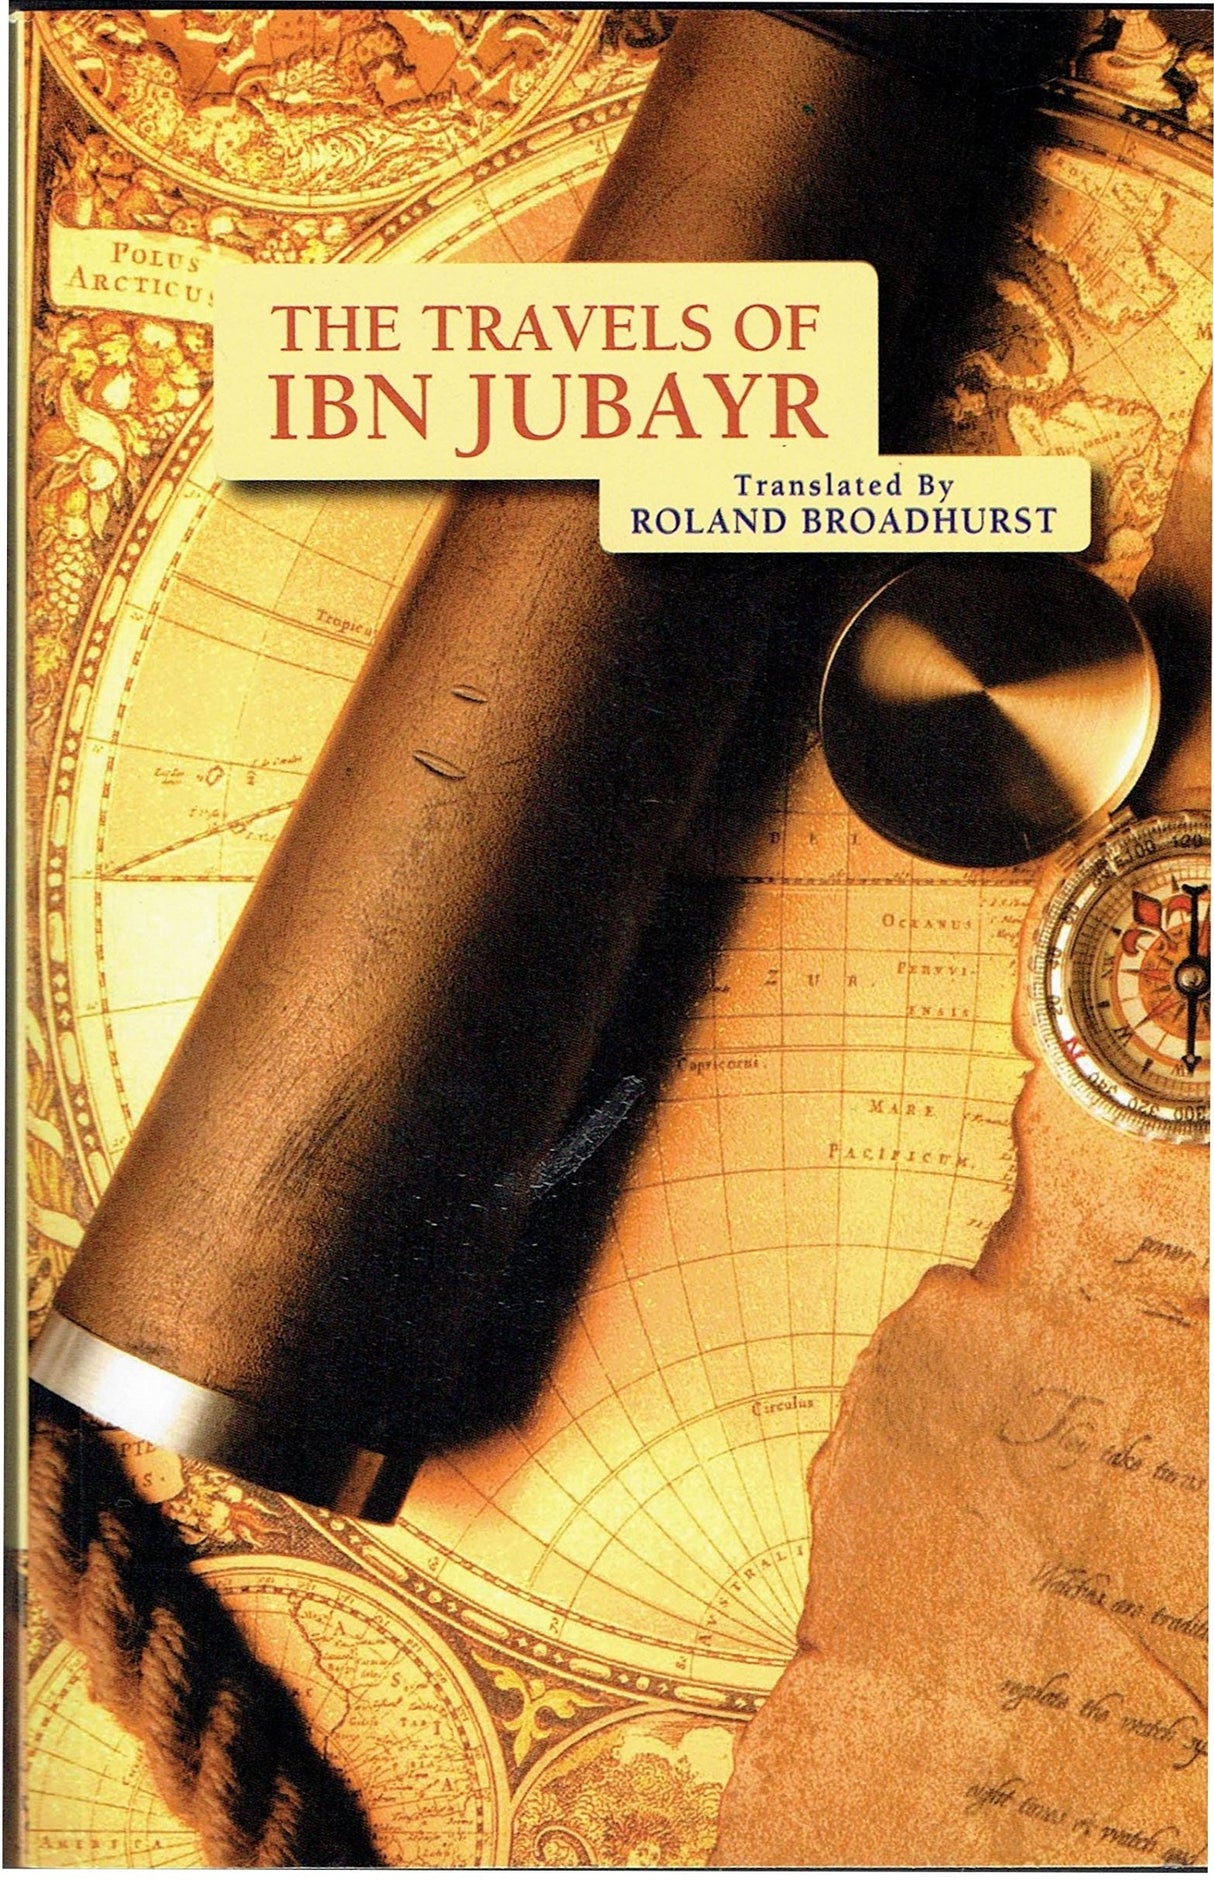 The Travels of Ibn Jubayr